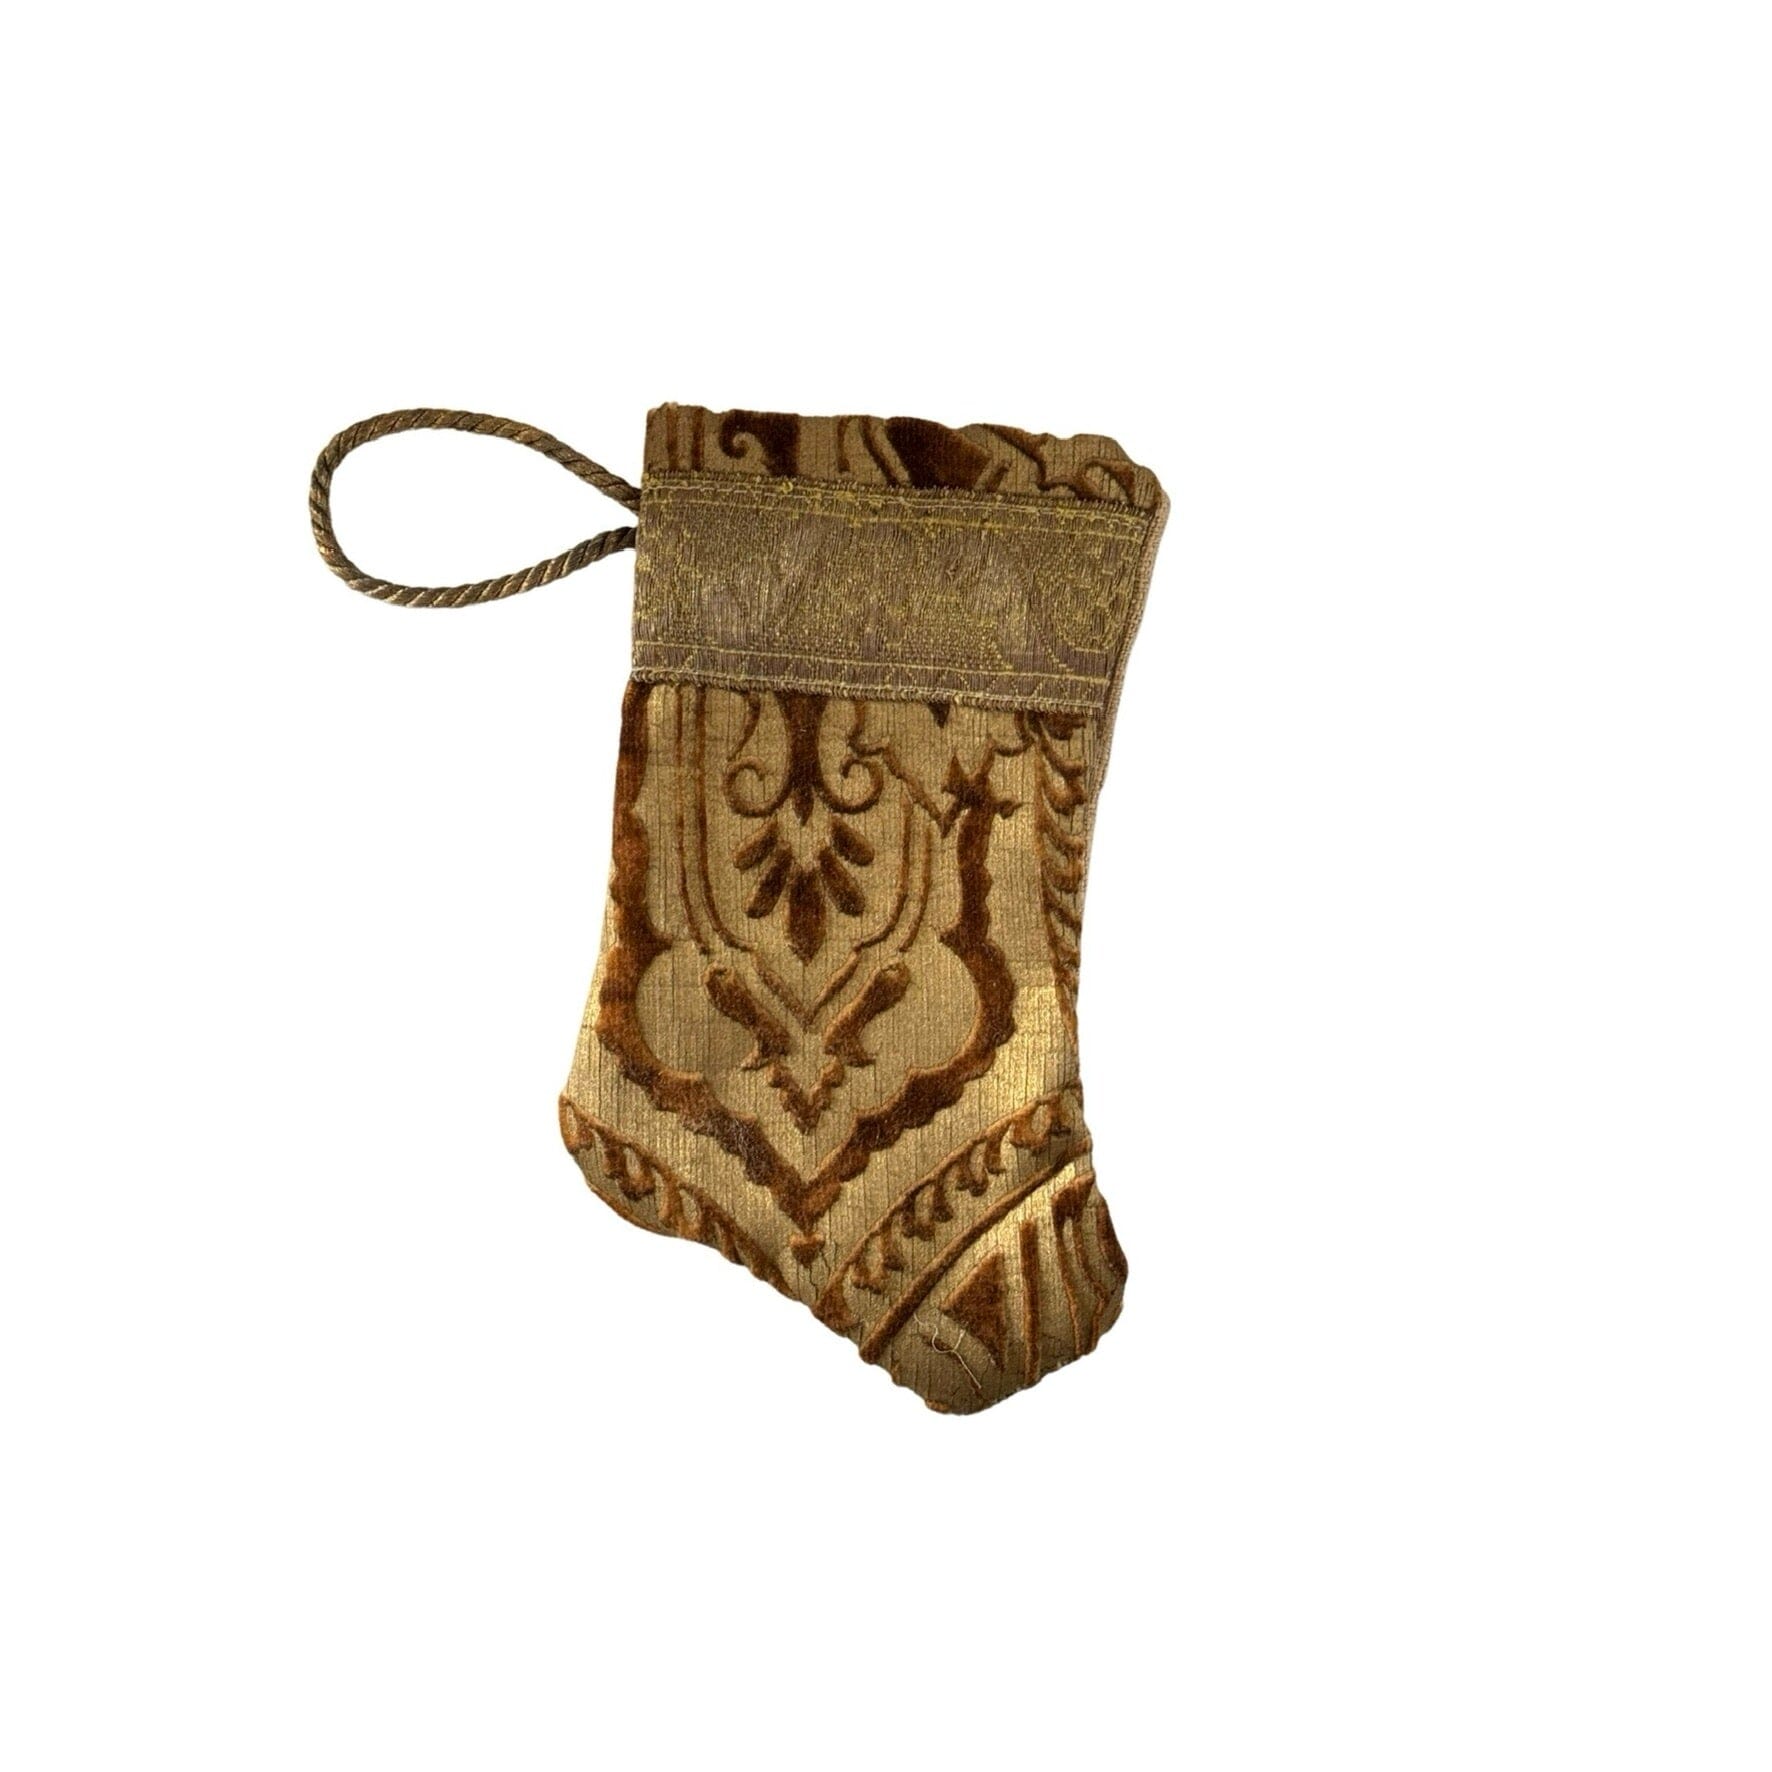 Handmade Mini Stocking Made From Vintage Fabric and Trims- Brown and Gold Ornament B. Viz Design I 